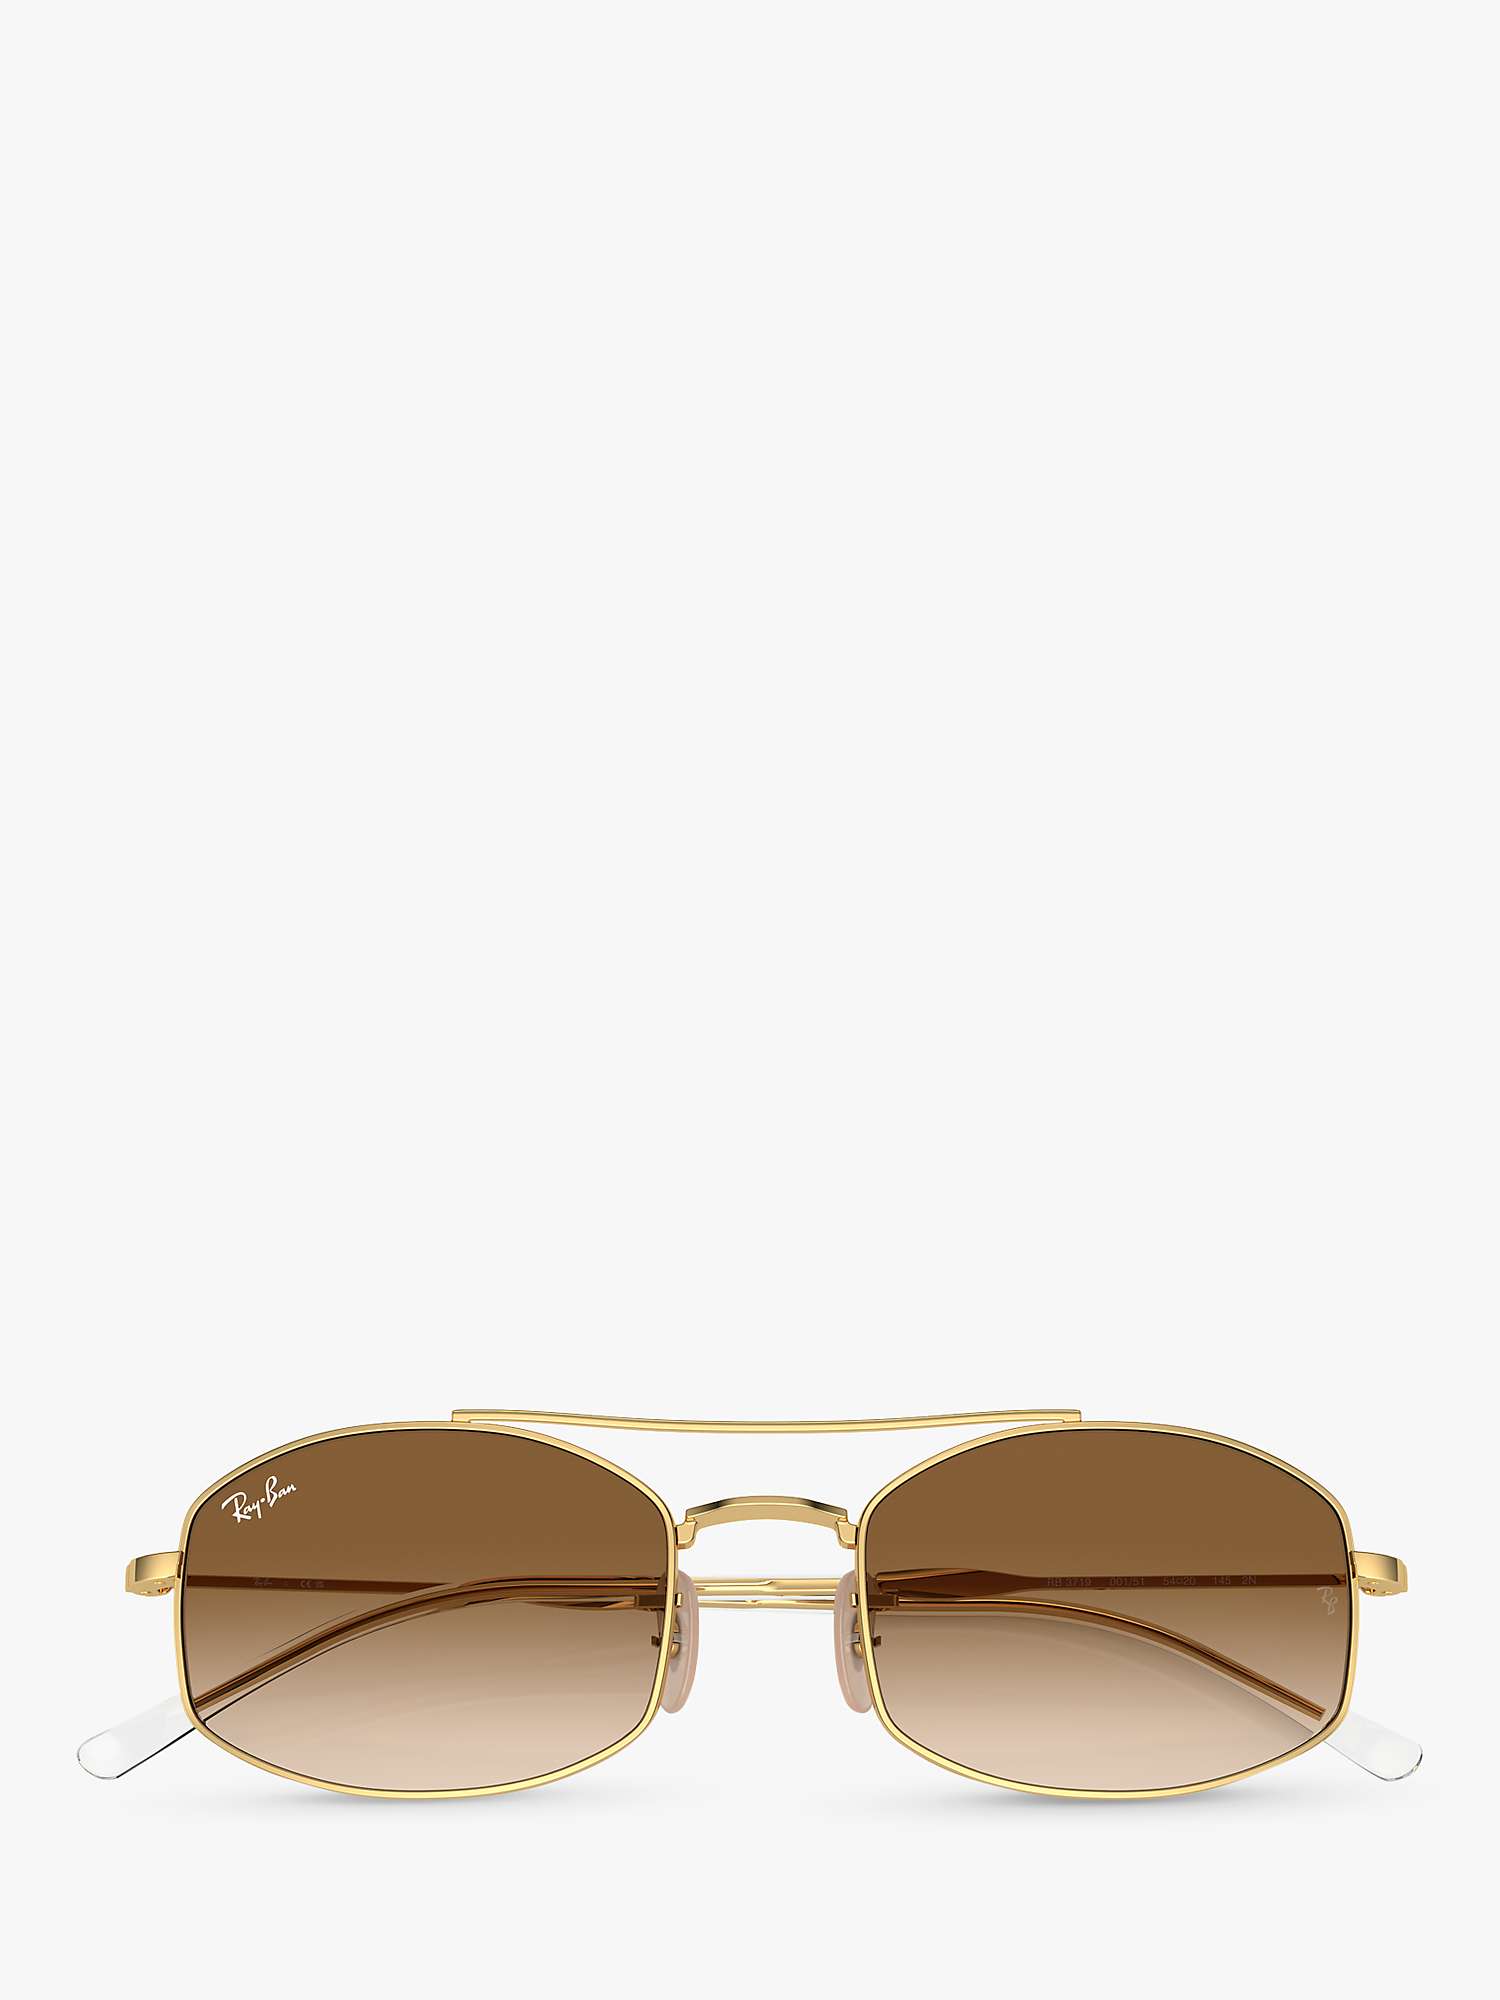 Buy Ray-Ban RB3719 Unisex Oval Sunglasses, Arista Gold/Brown Gradient Online at johnlewis.com